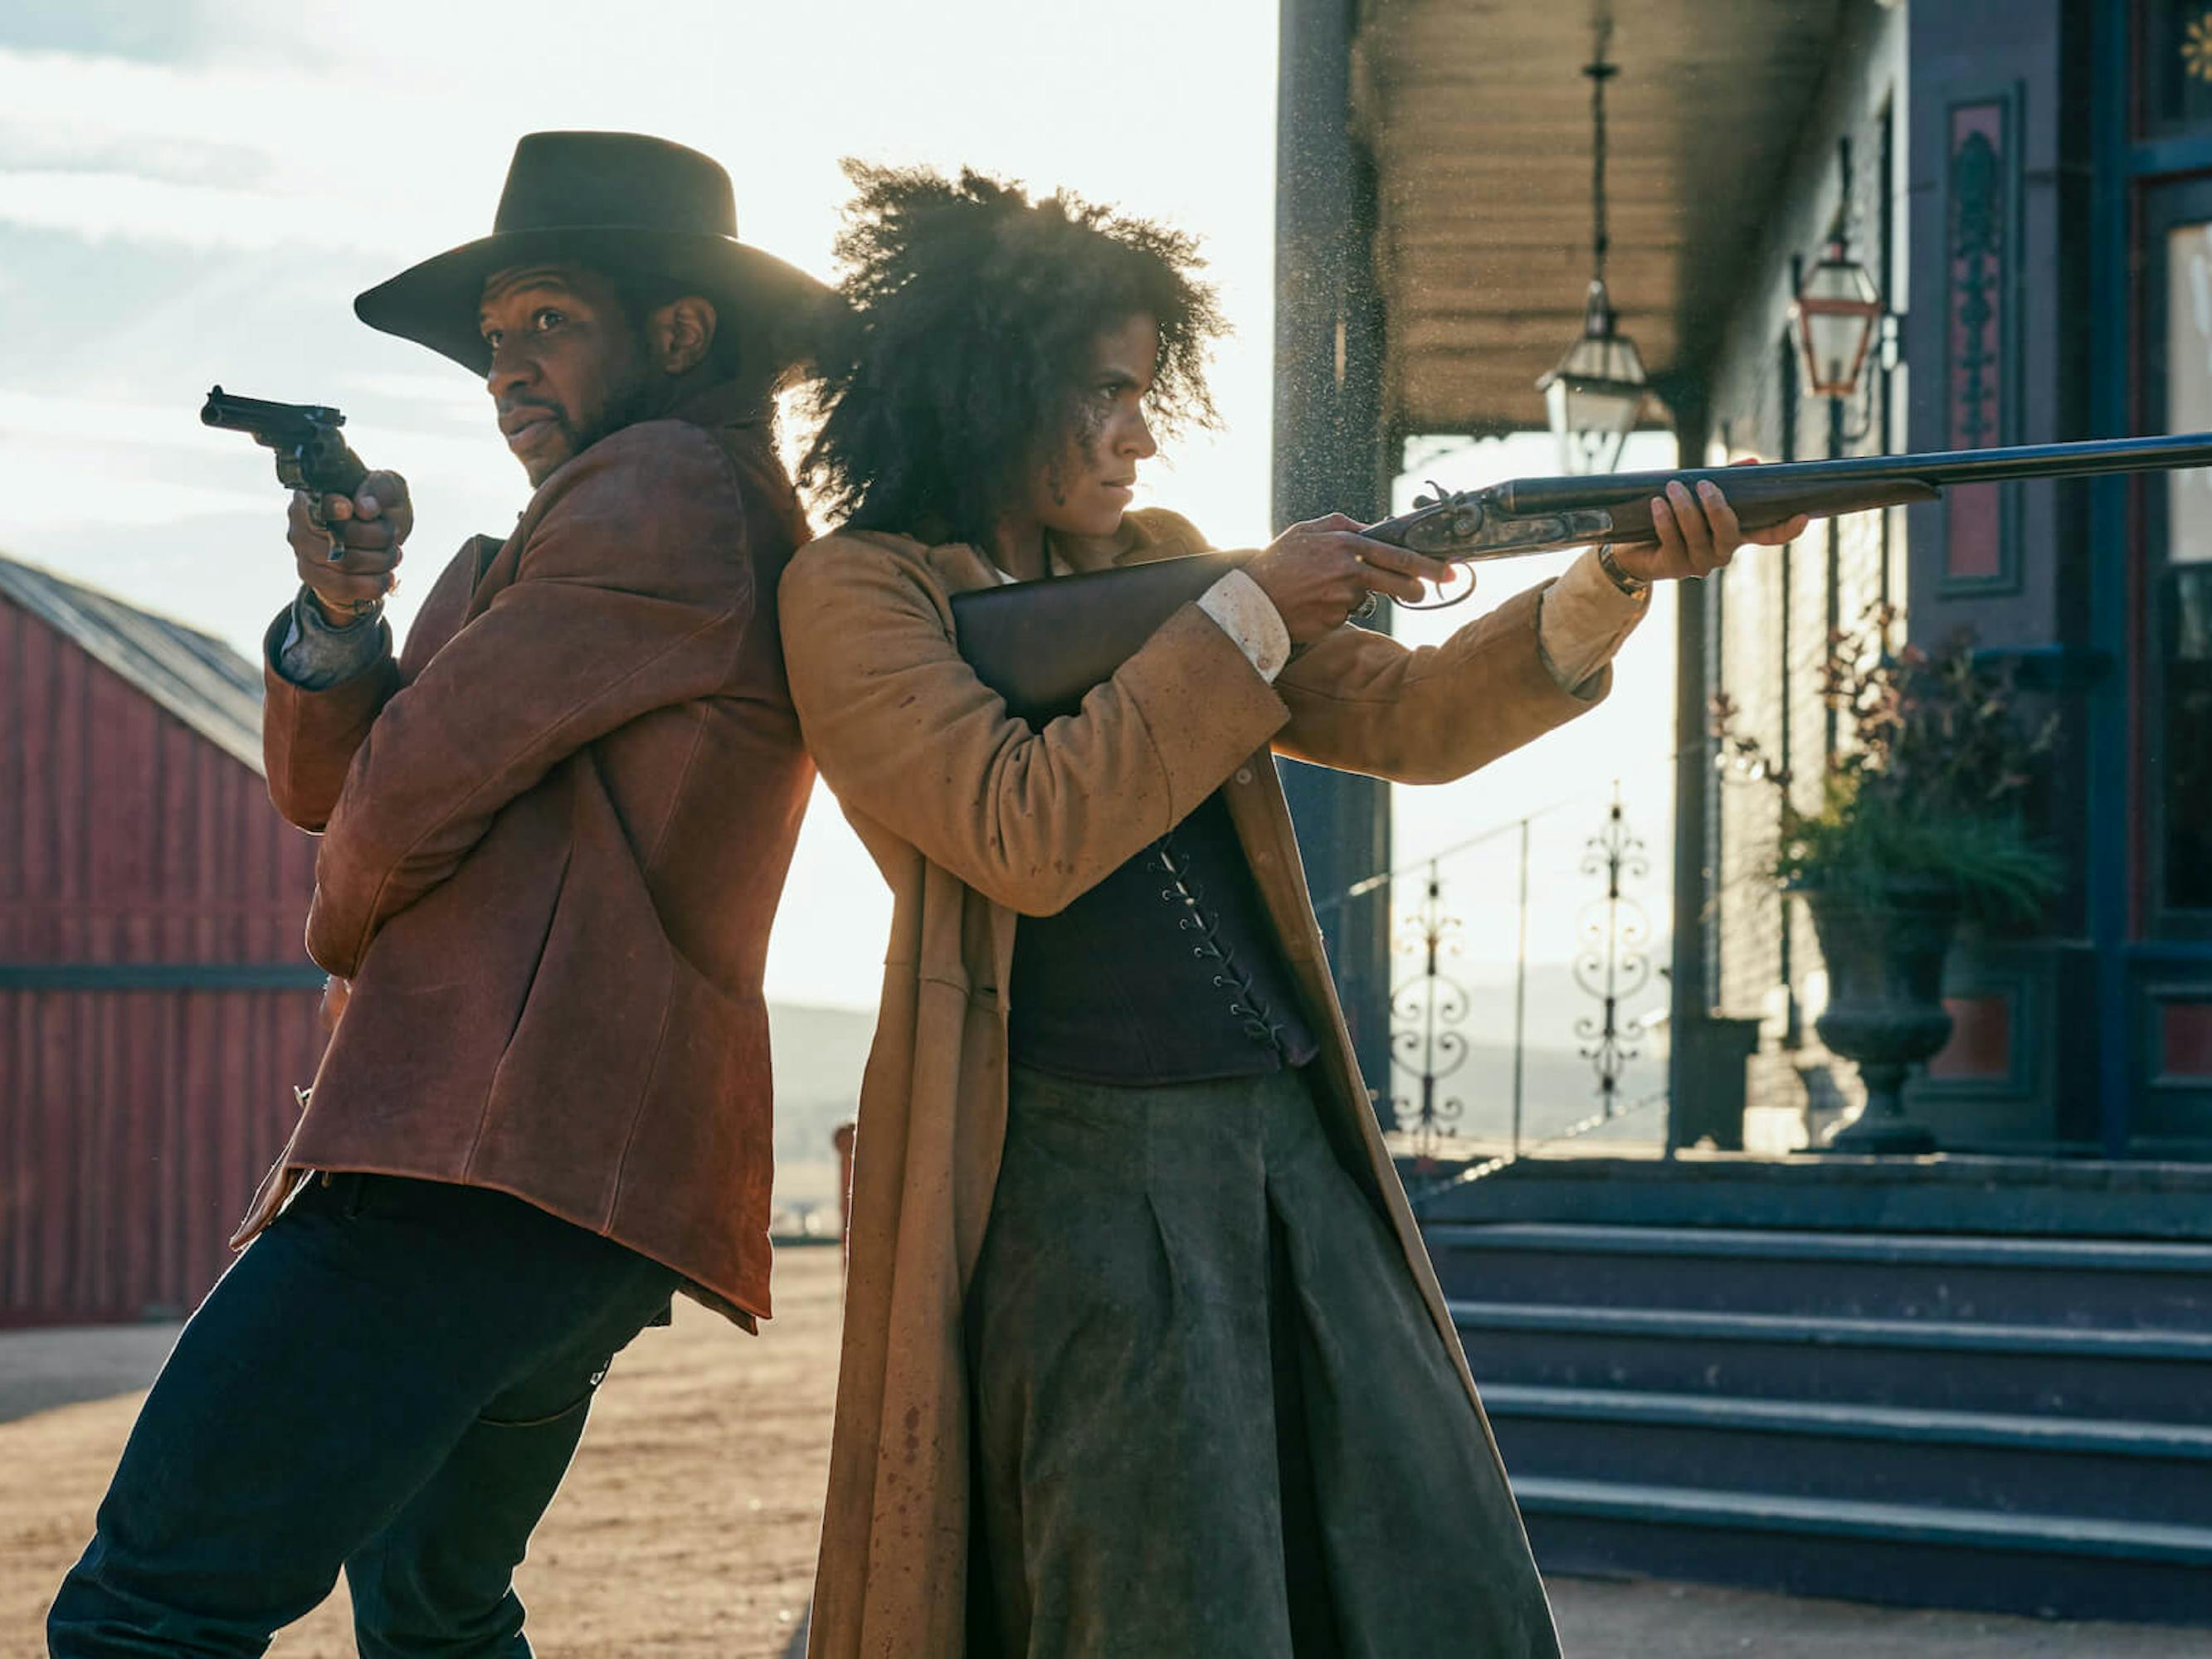 Nat Love (Jonathan Majors) and Stagecoach Mary Fields (Zazie Beetz) stand back to back, their guns at the ready. They both wear brown jackets. Mary carries a long rifle and Majors holds a pistol.